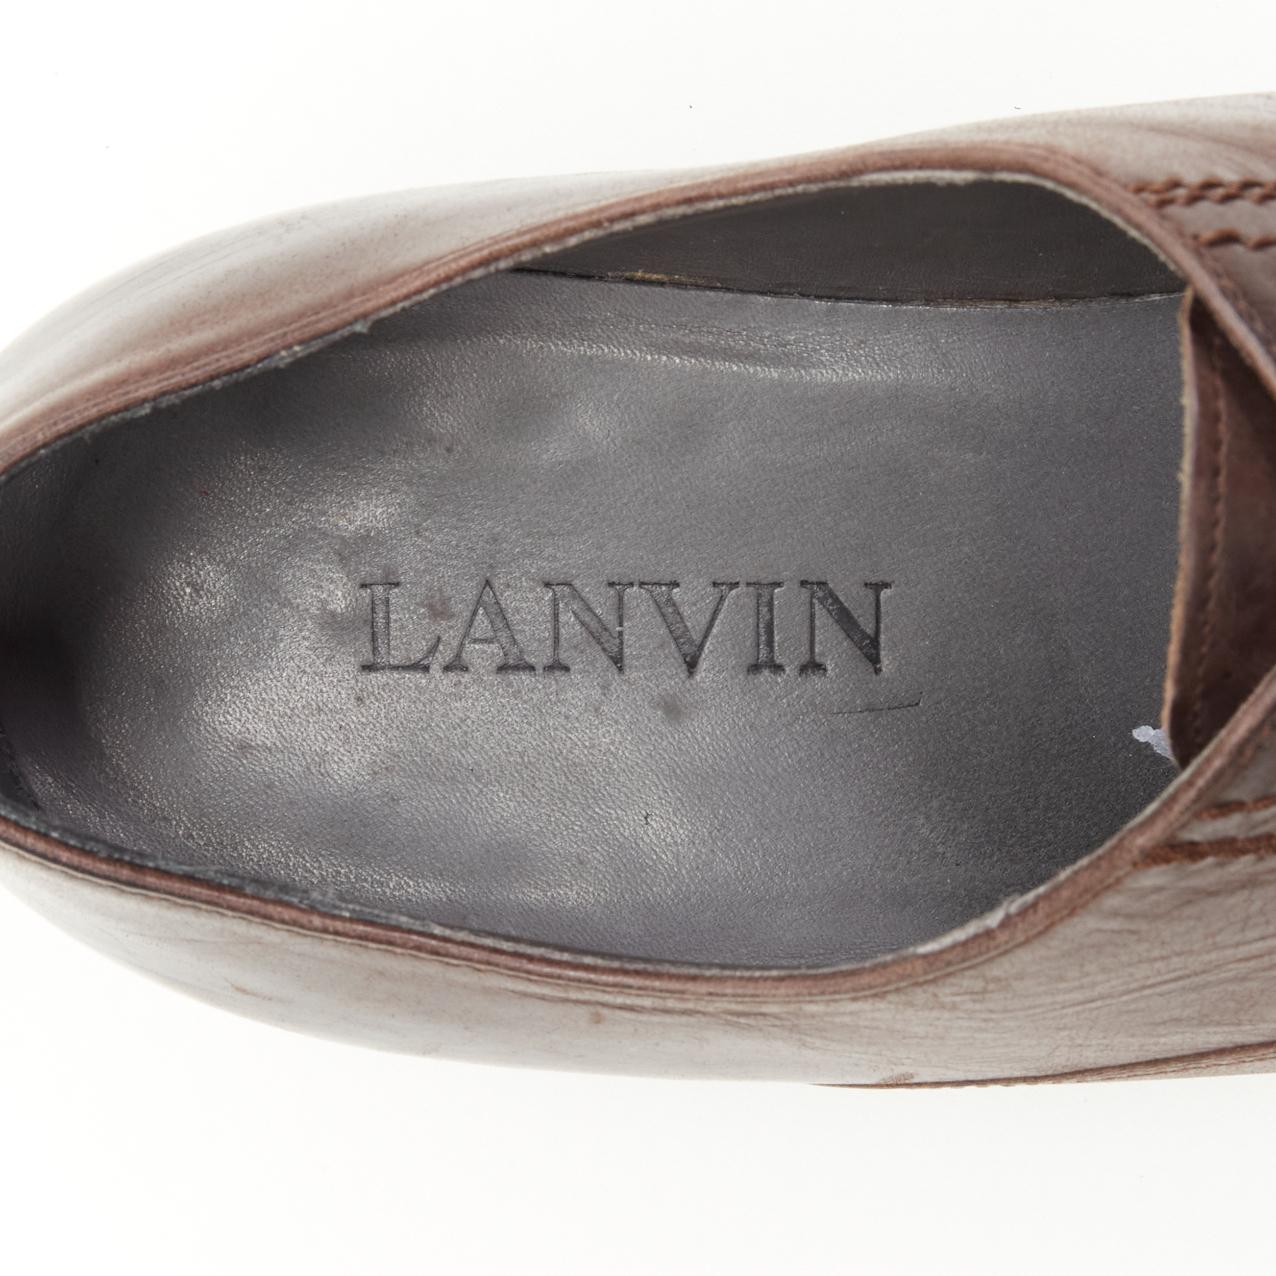 LANVIN brown calfskin lace up distressed scuffed leather dress shoes US8 EU41 For Sale 5